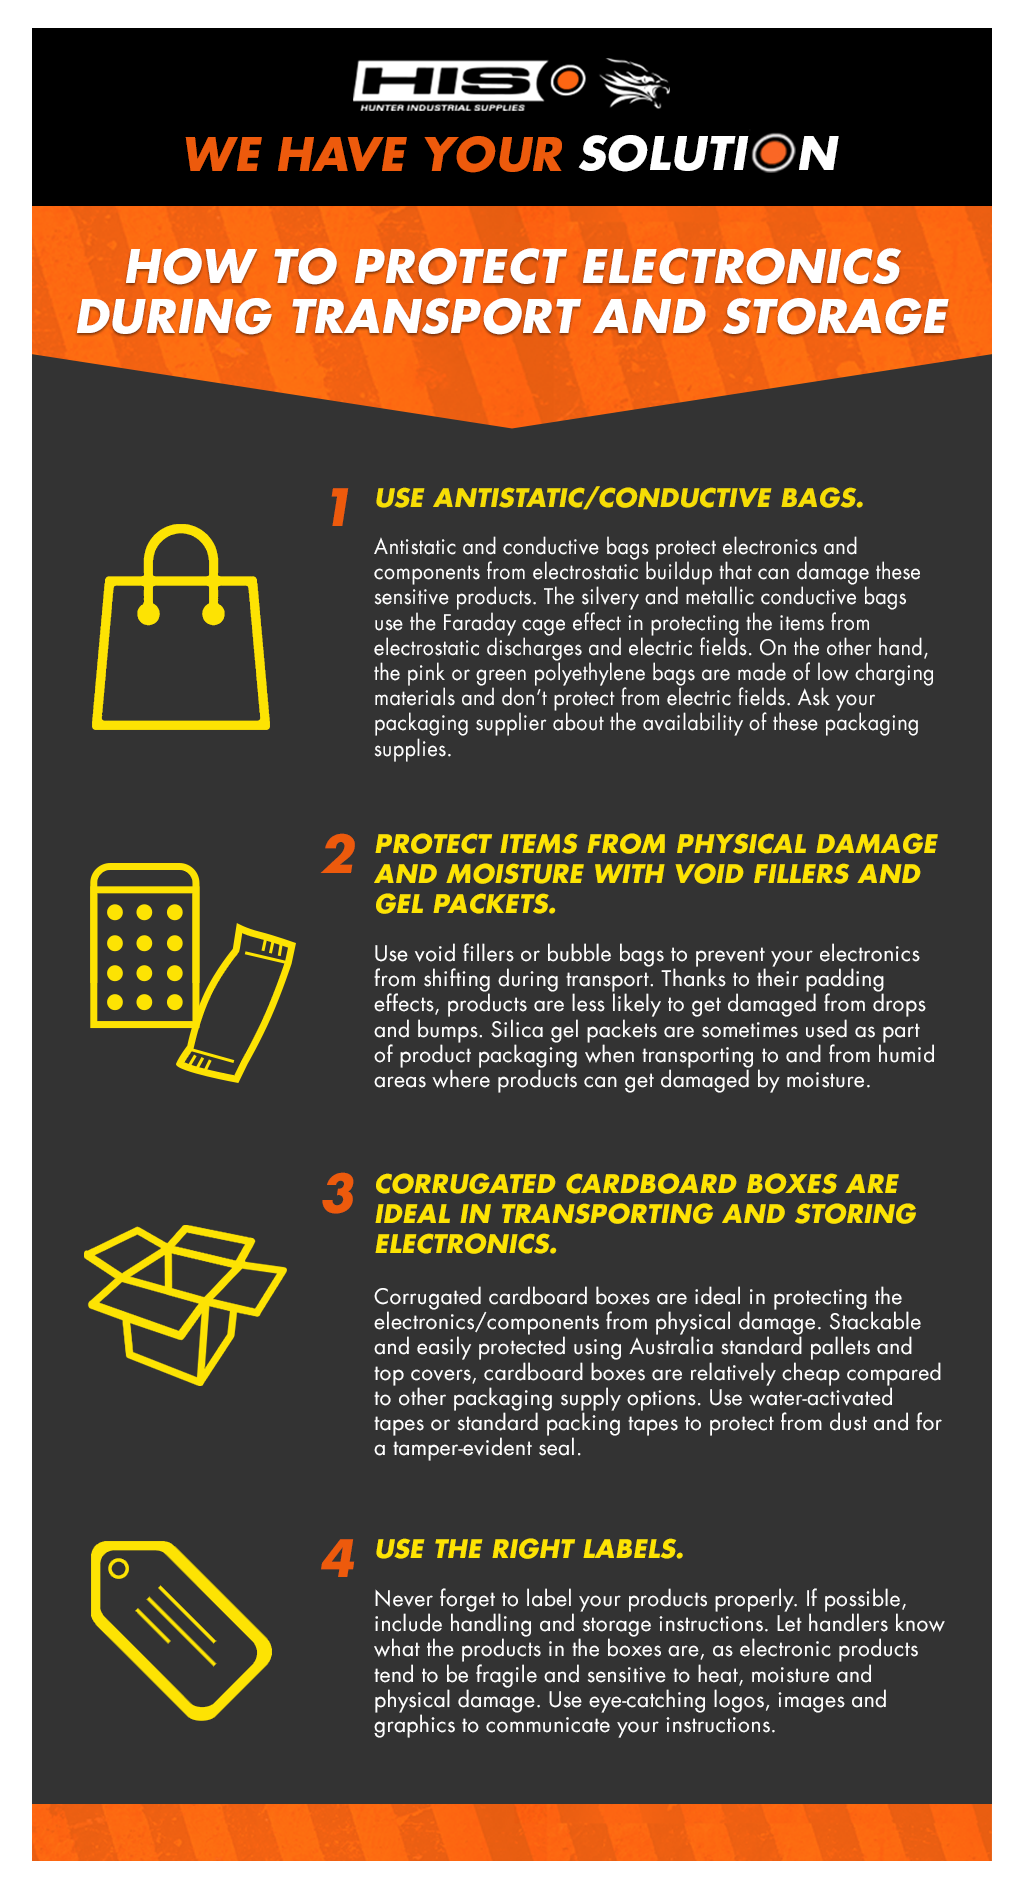 view the infographic on how to package electronics for transport